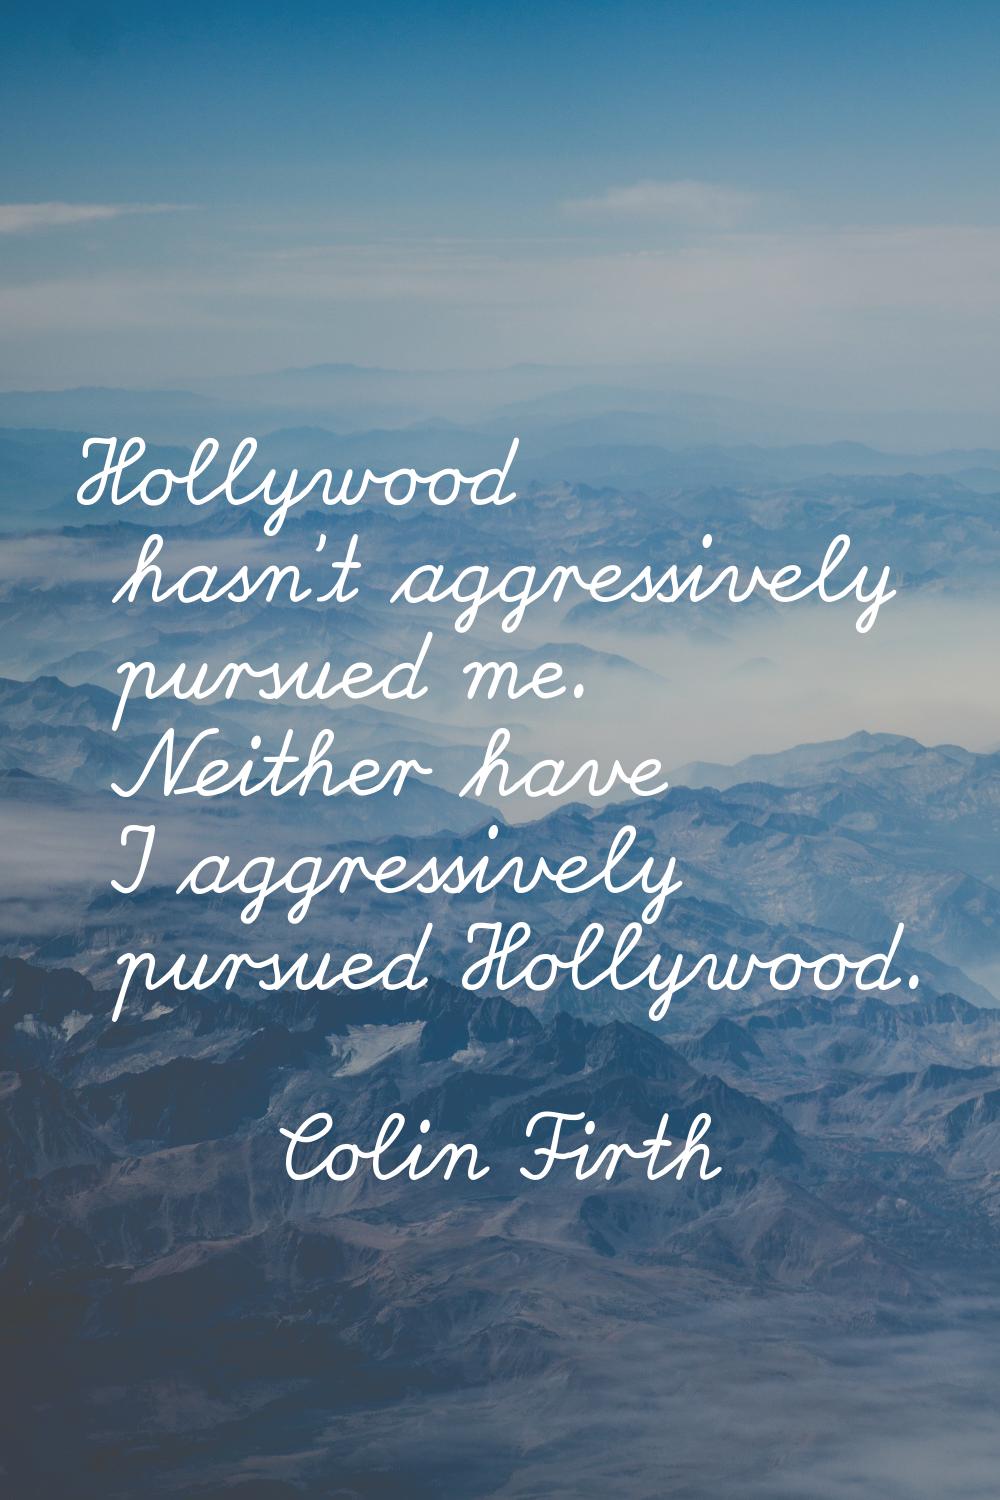 Hollywood hasn't aggressively pursued me. Neither have I aggressively pursued Hollywood.